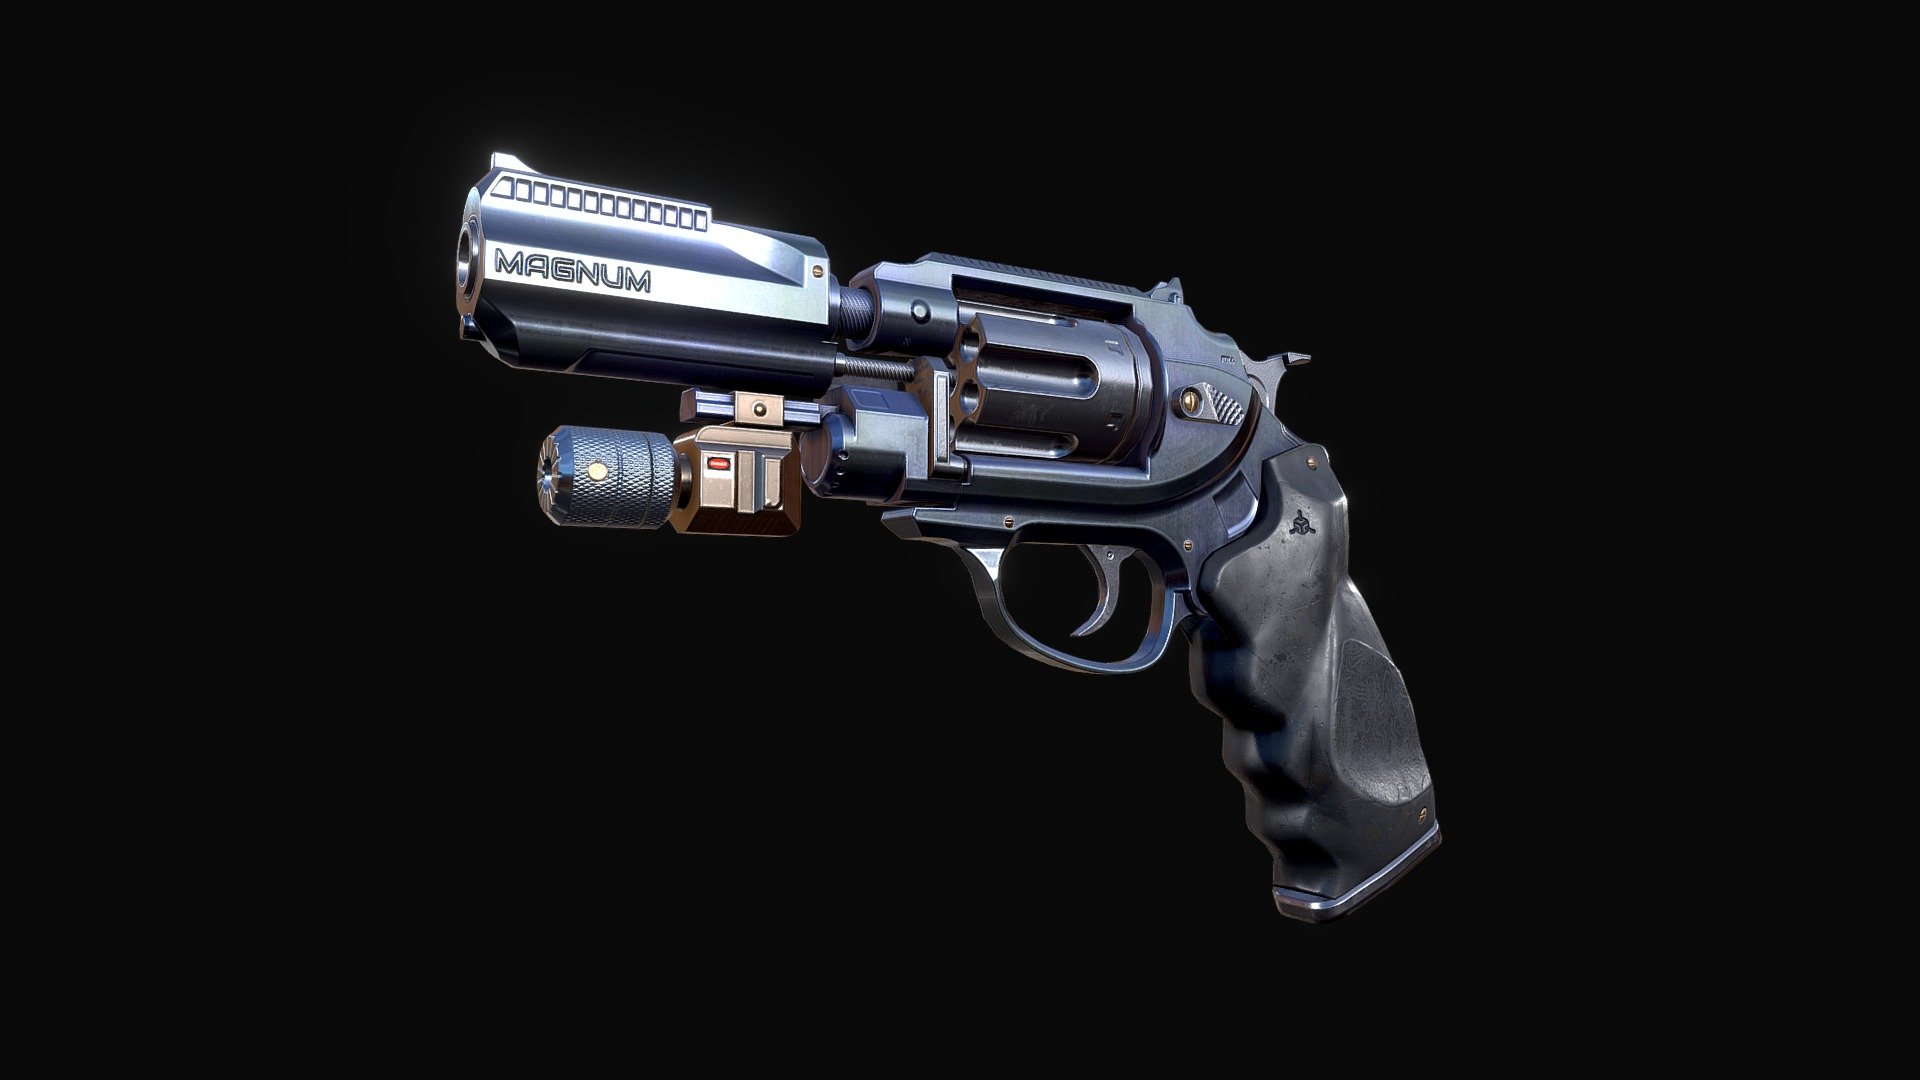 Blend file included

Detailed low-poly model of a Magnum Revolver, perfect for use in medium-distance rendering and video games. Includes 4K textures and a single material set-up for easy integration into Unity, Unreal, Blender, etc.

Includes separated animations for shooting and reloading.

If you require different resolutions or texture presets, please send me an email, and I'll be happy to assist you for free 3d model